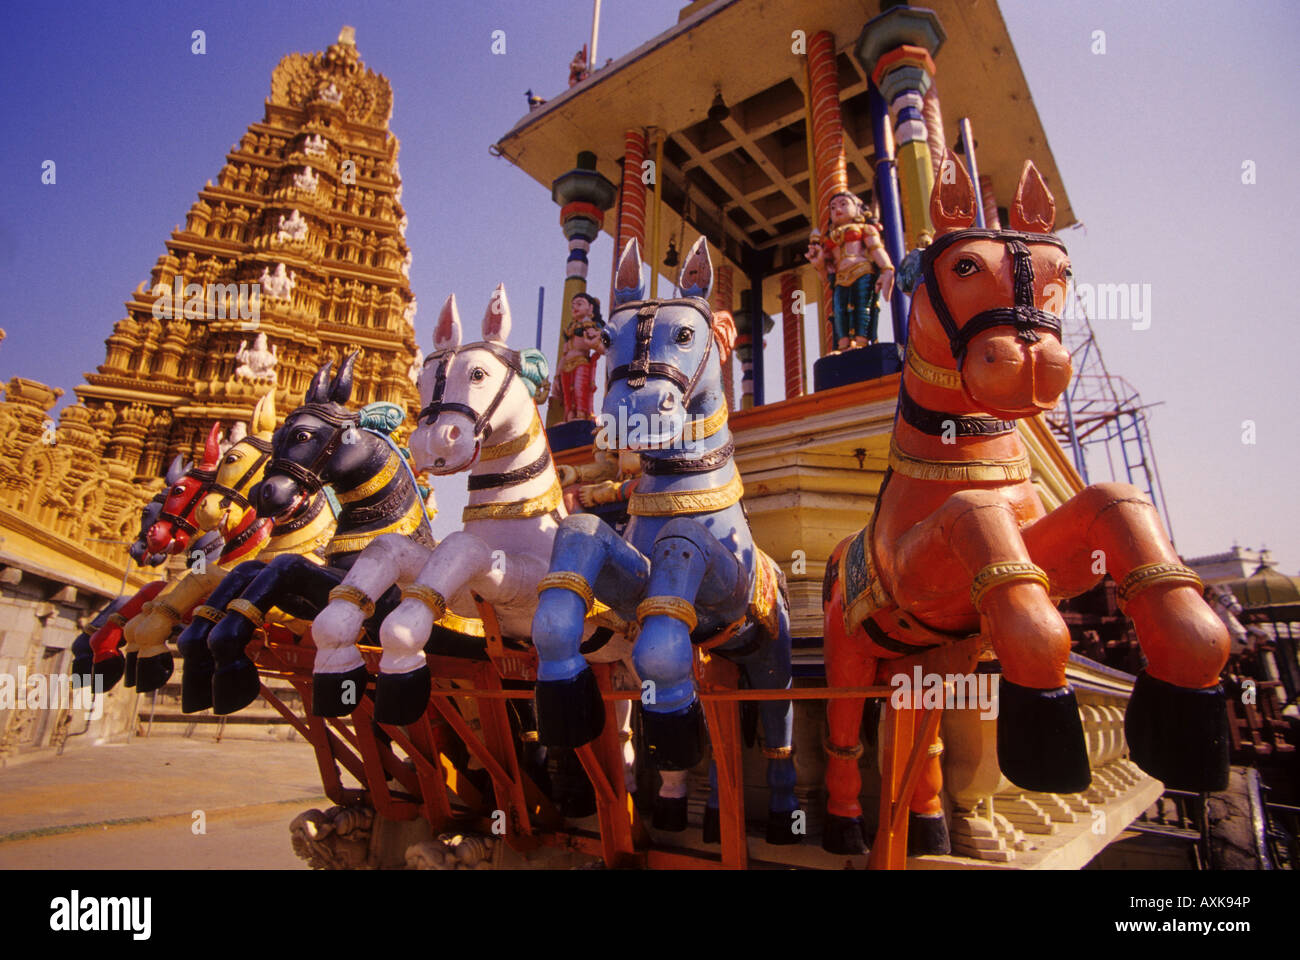 Wooden horses on a temple chariot stand outside of the Nanjundeswara Temple in the Karnatakan town of Nanjangud. Stock Photo